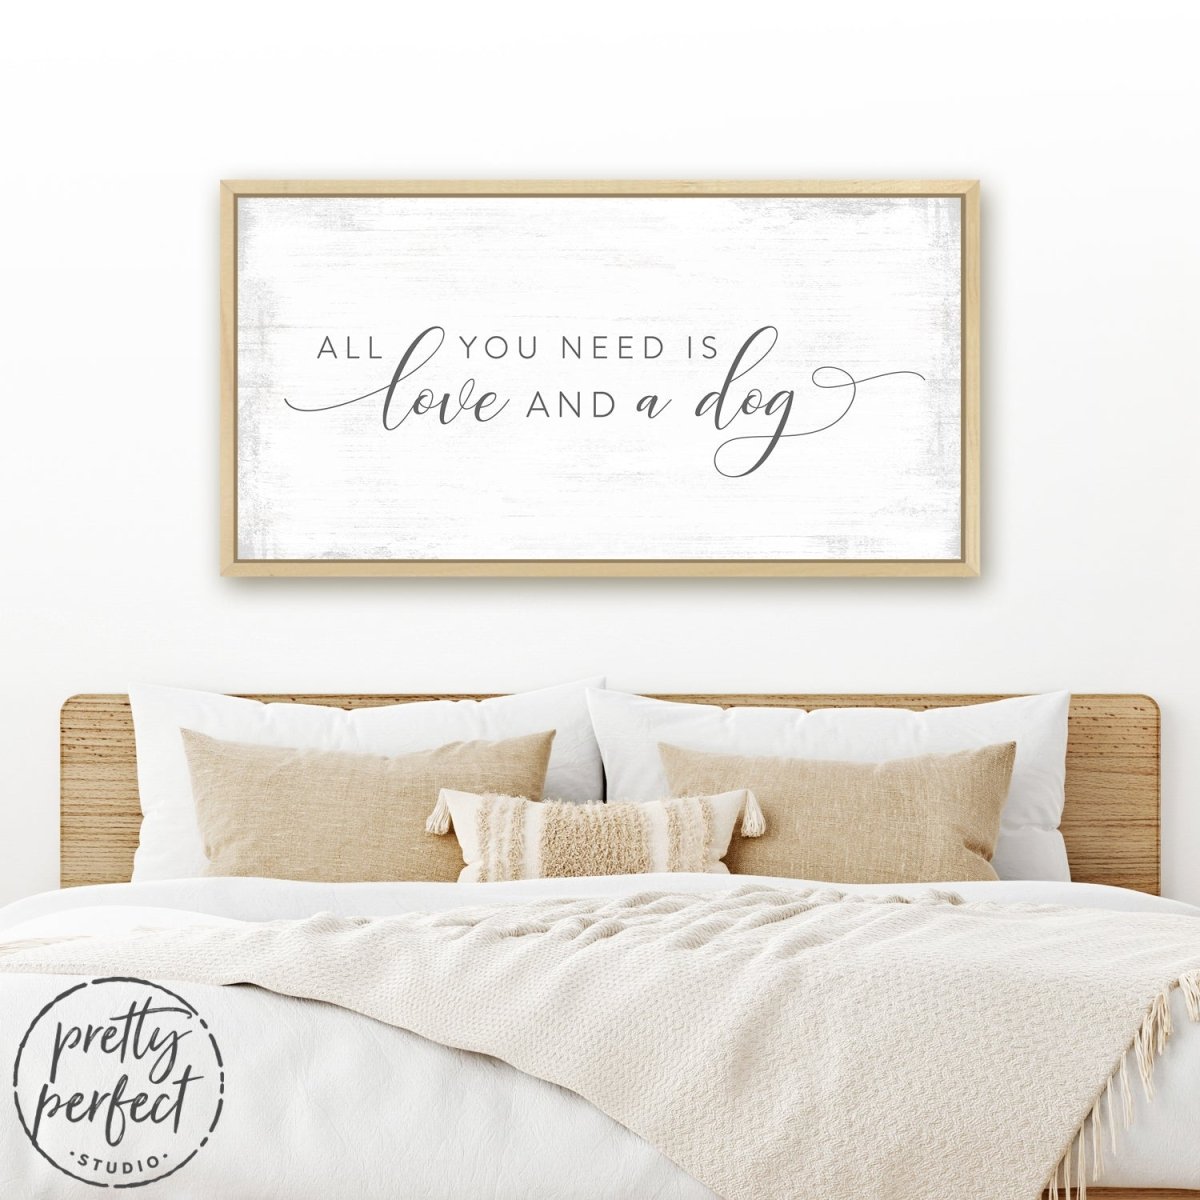 All You Need Is Love And A Dog Canvas Sign Above Bed - Pretty Perfect Studio